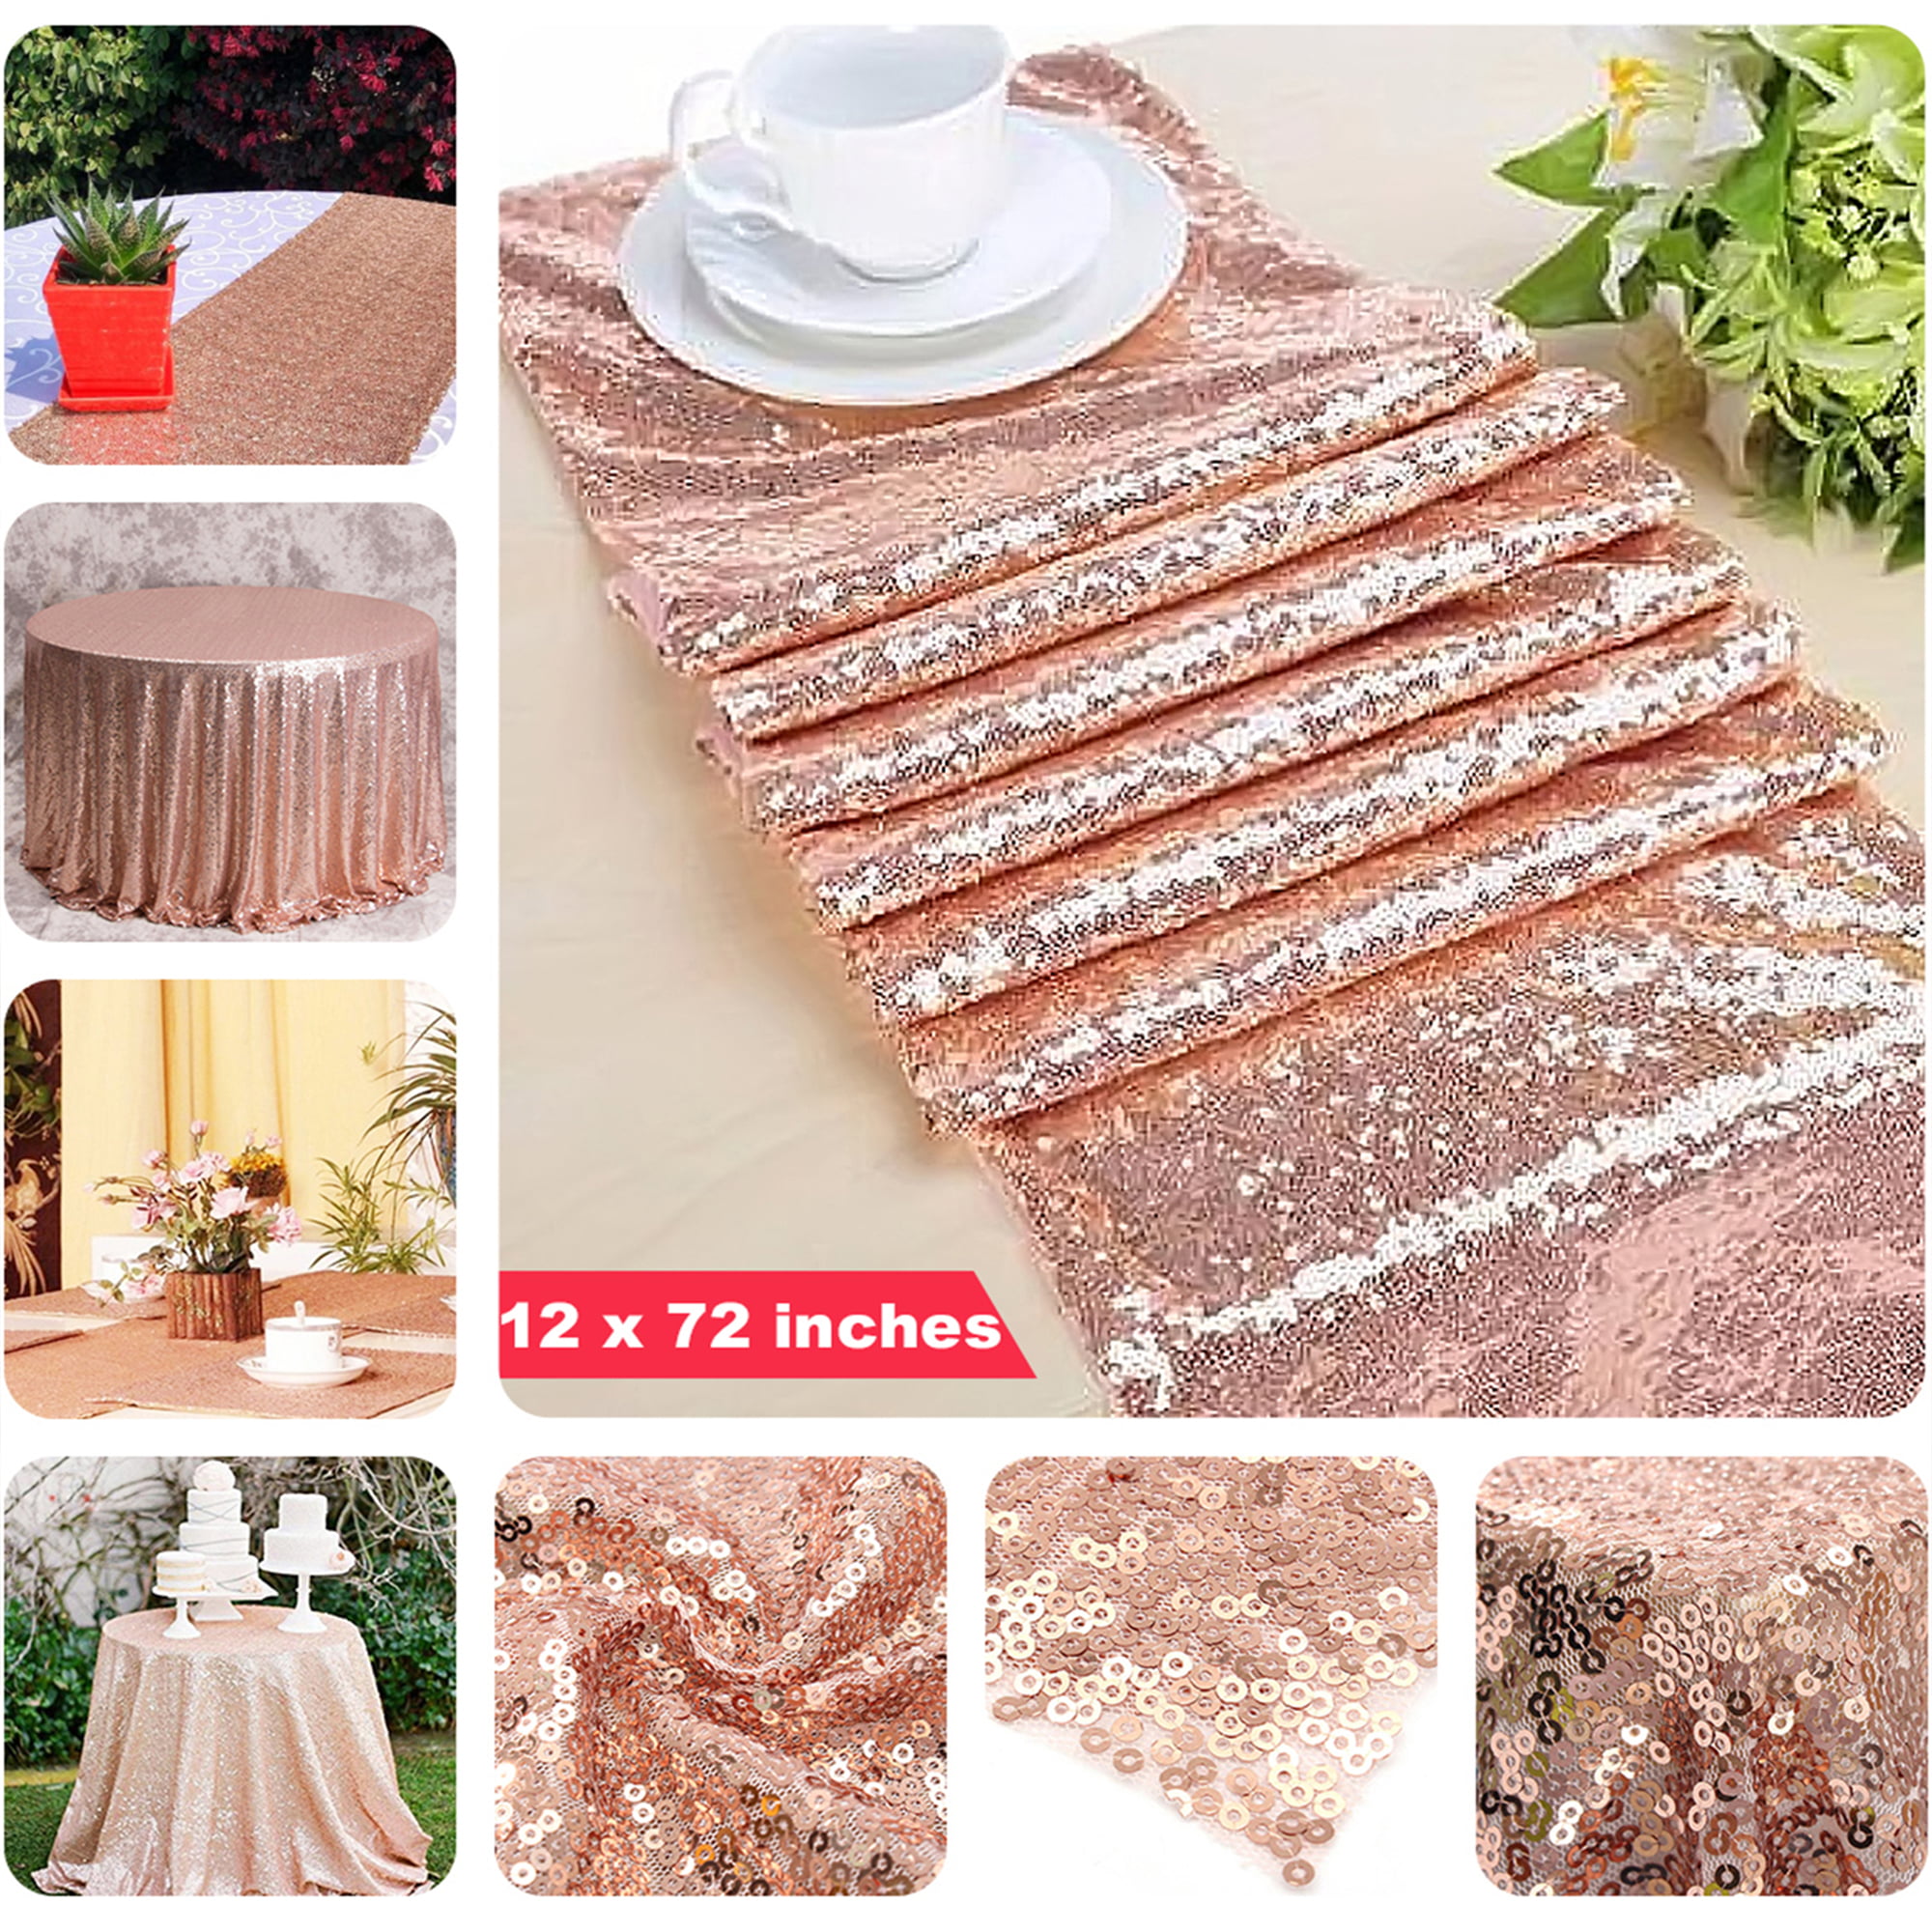 10 pcs 12 x 72 inches Sequin Sparkly Table Cloth Fabric Tablecloth Table  Runner Wedding Event Banquet Decor Photography Background Backdrop Photo 